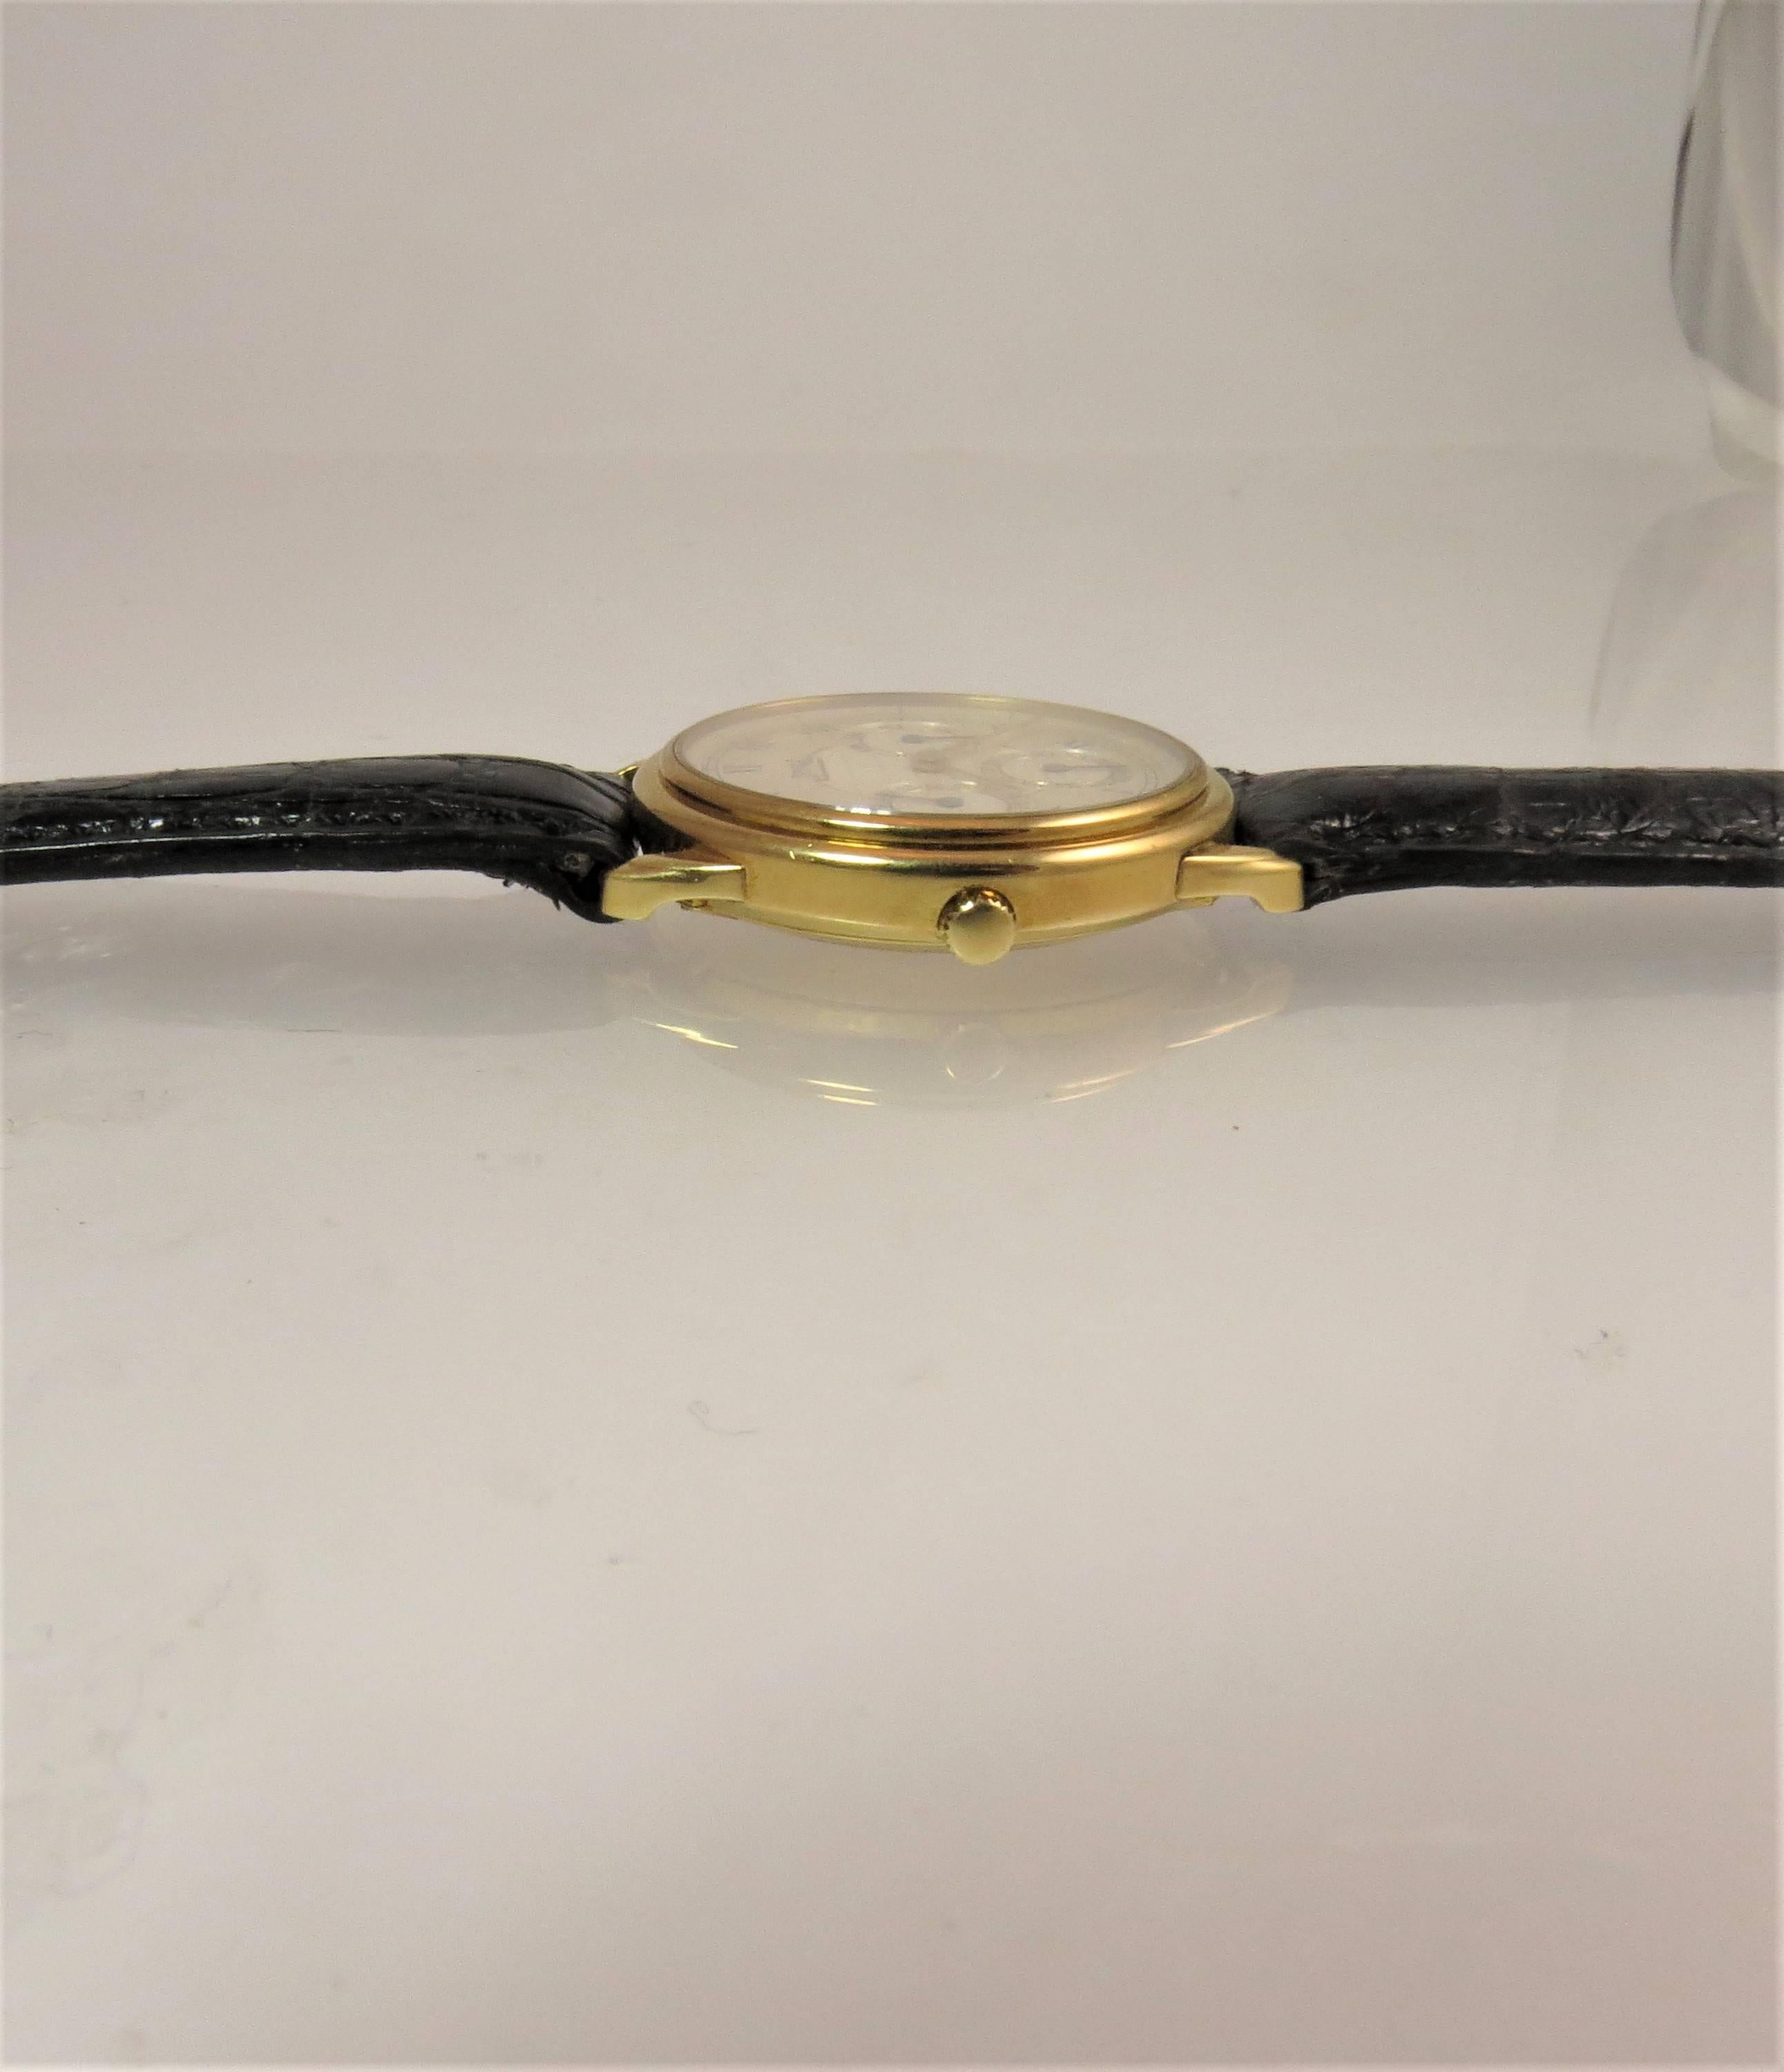 Contemporary Brand New, Never Worn, Yellow Gold Piaget Automatic Strap Watch